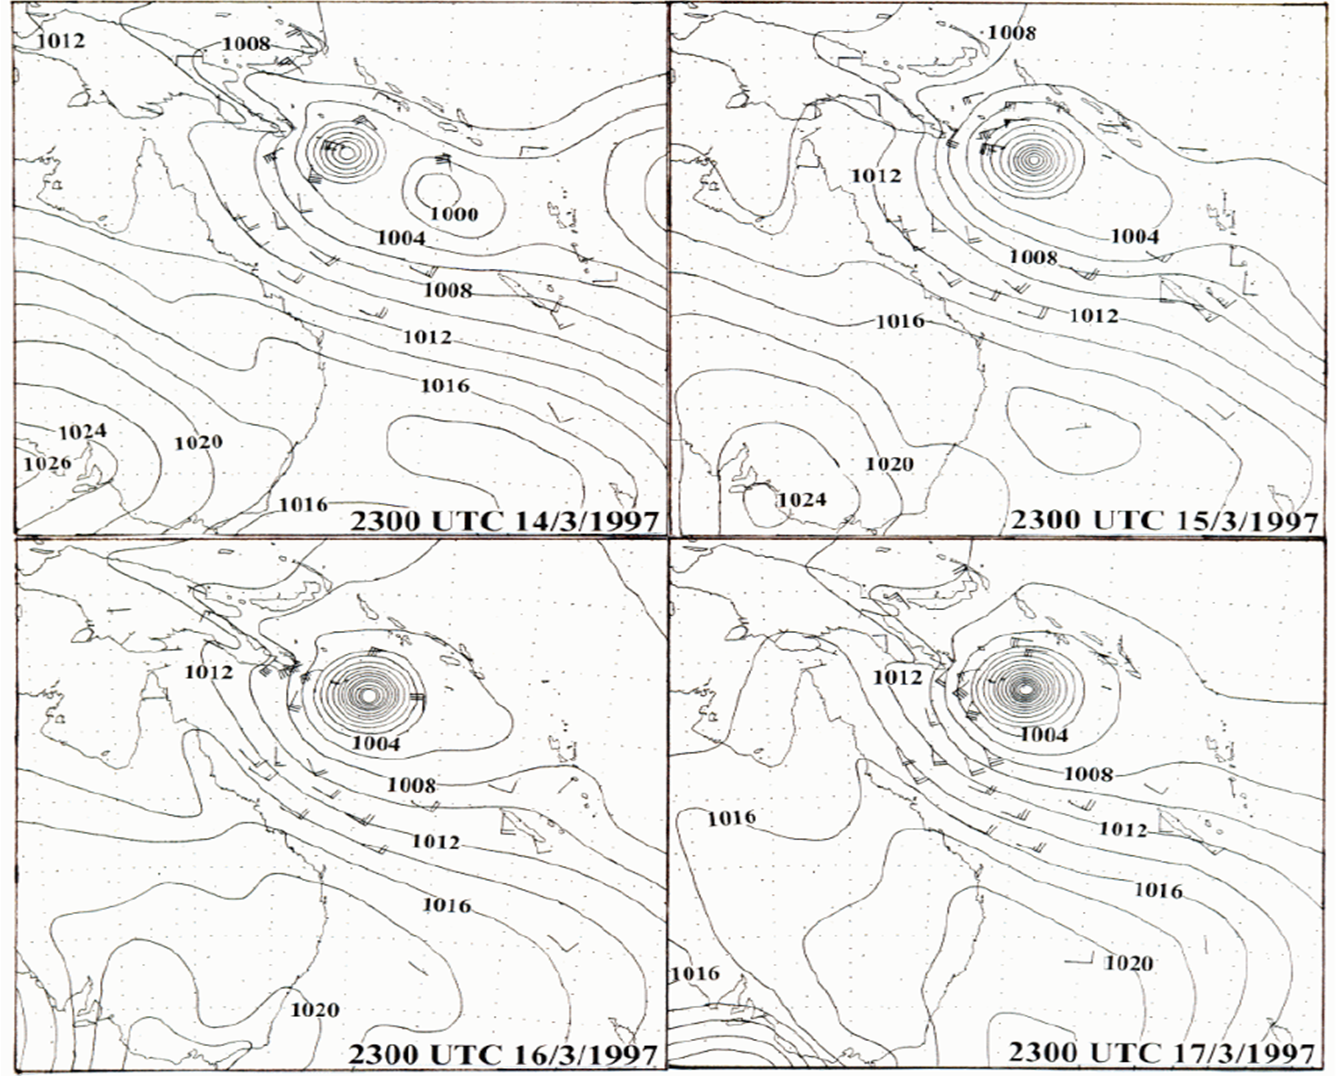 Mean sea level pressure analyses with plotted wind observations for tropical cyclone Justin for 14 March 1997